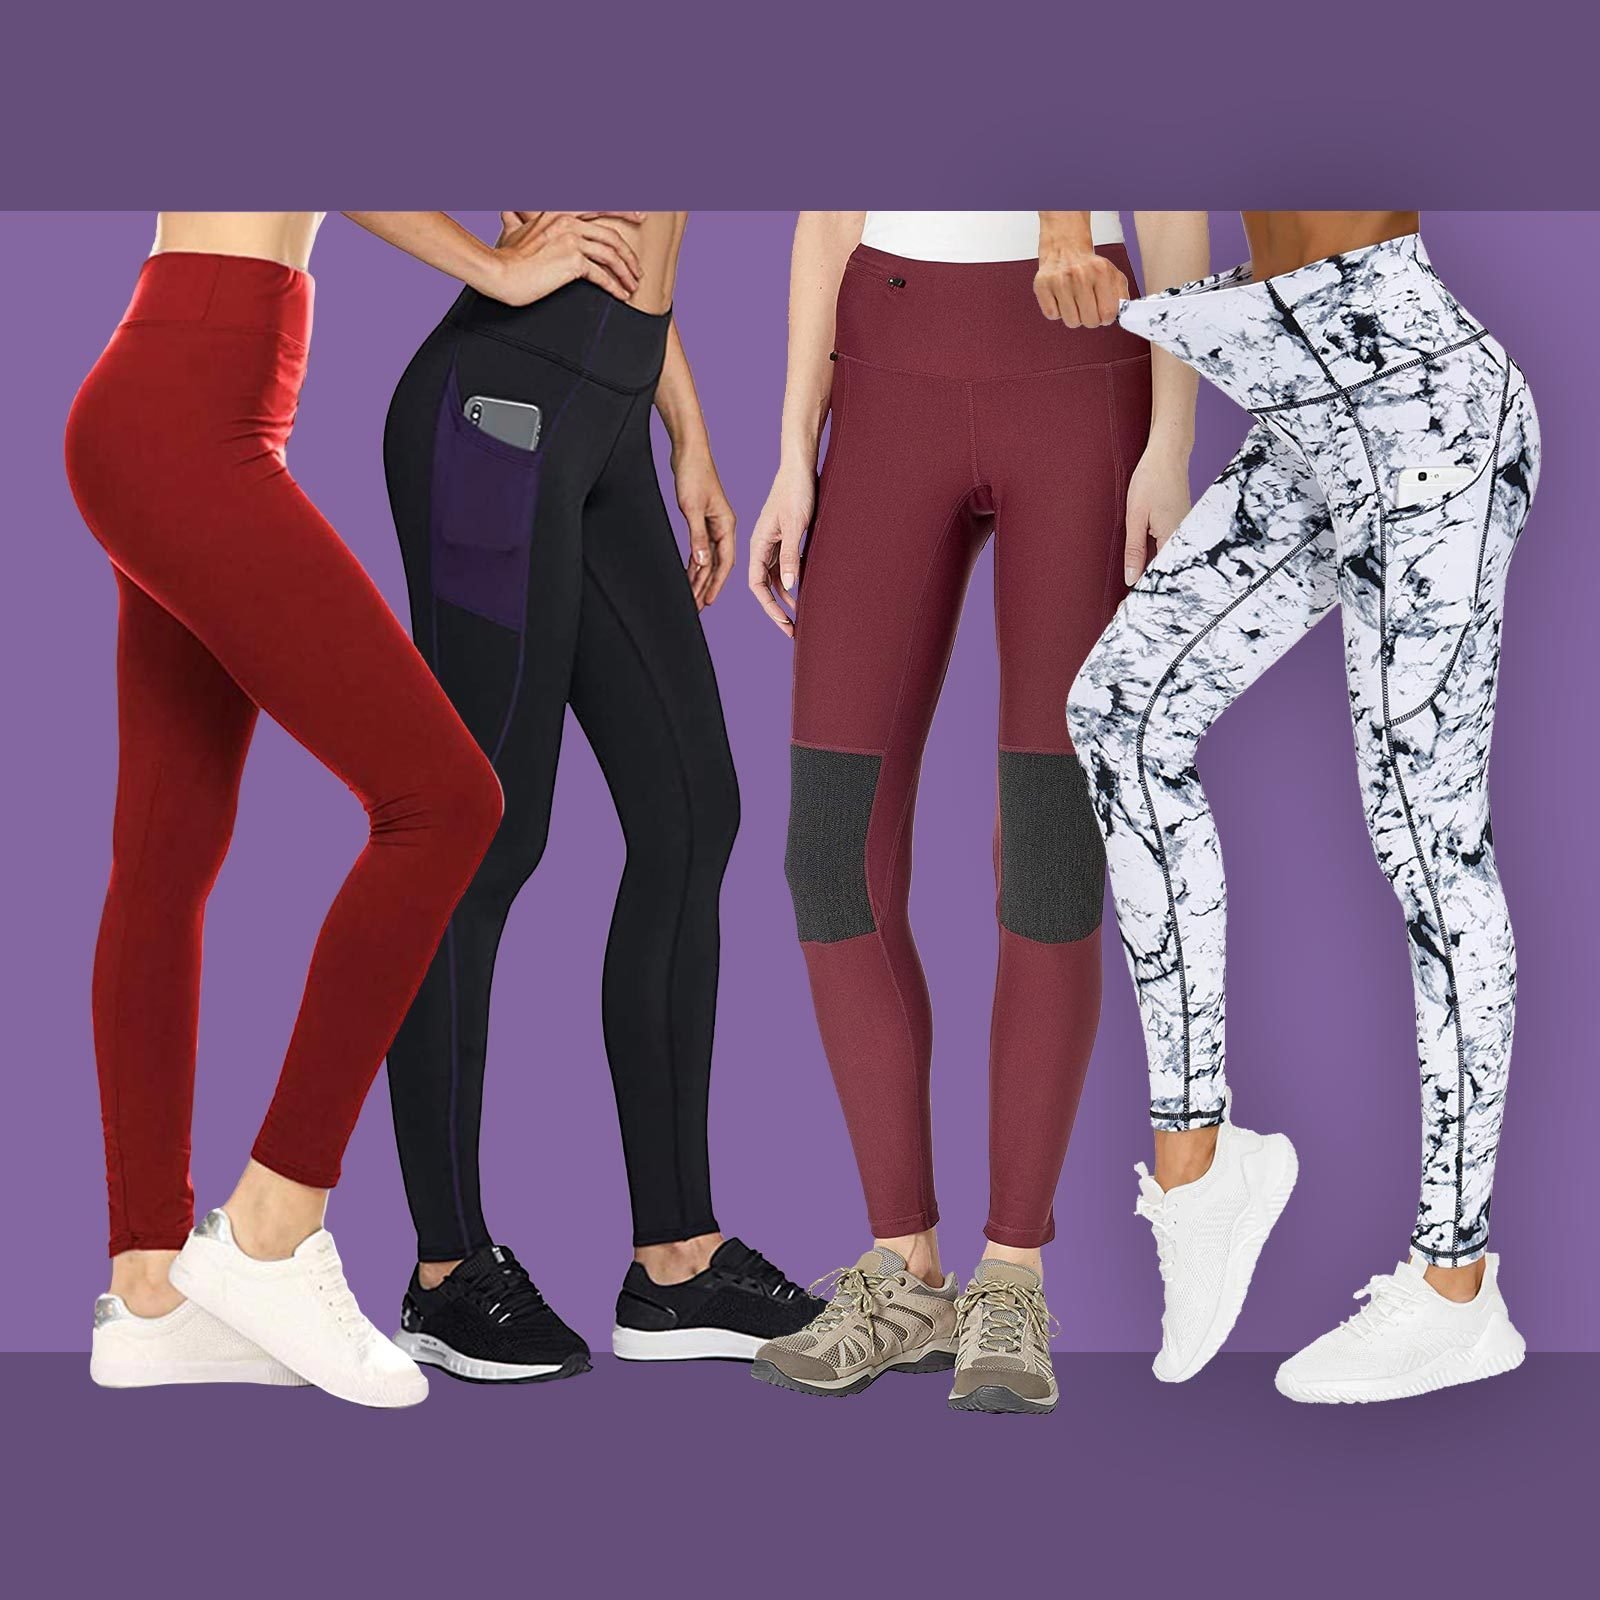 Best Leggings on Amazon for Women 2022 | Exercise, Home, Going Out